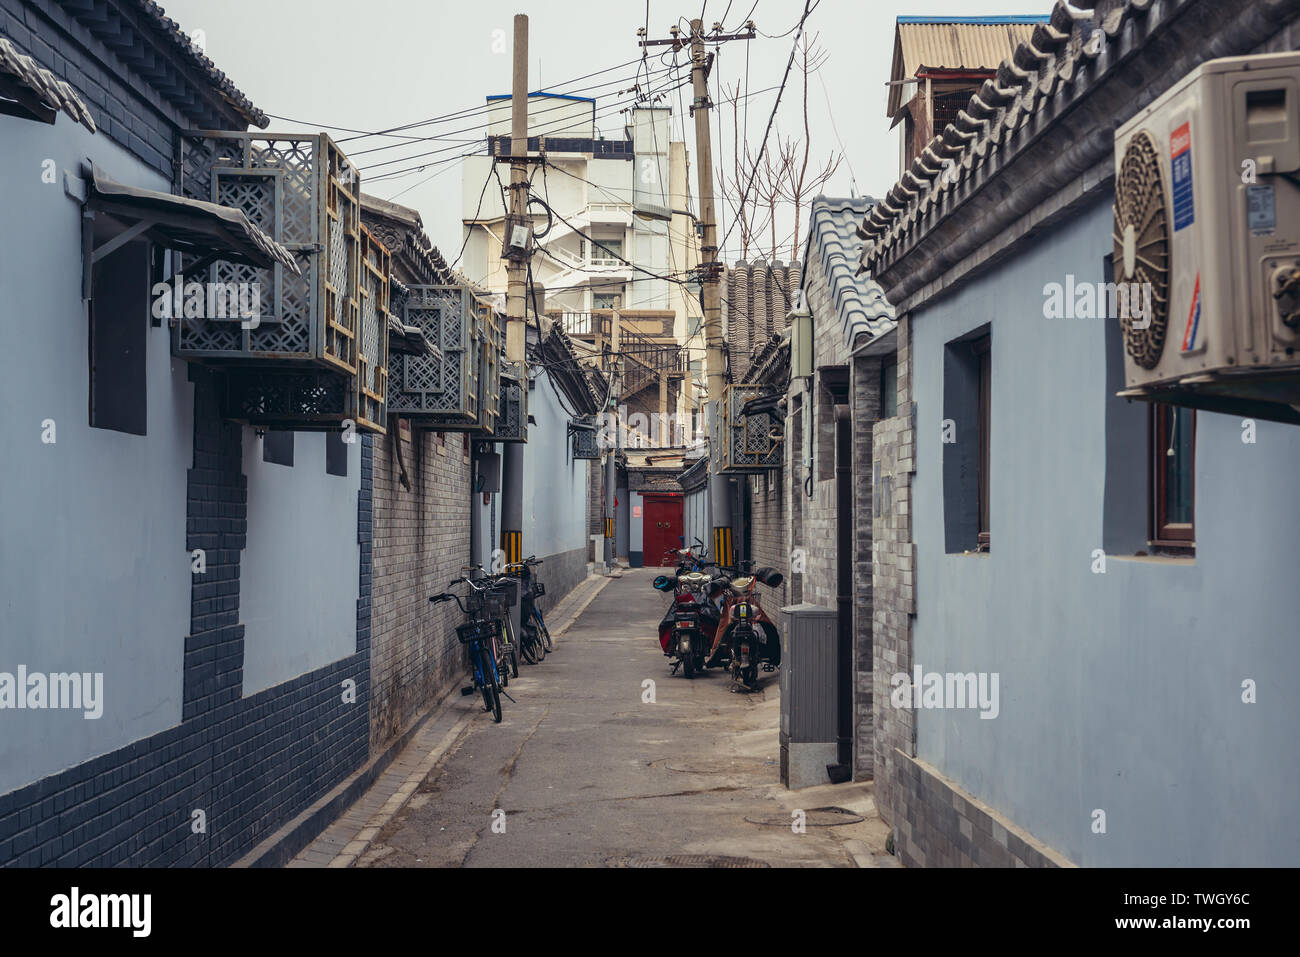 Narrow alley called hutong - traditional residential area in Dongcheng district of Beijing, China Stock Photo